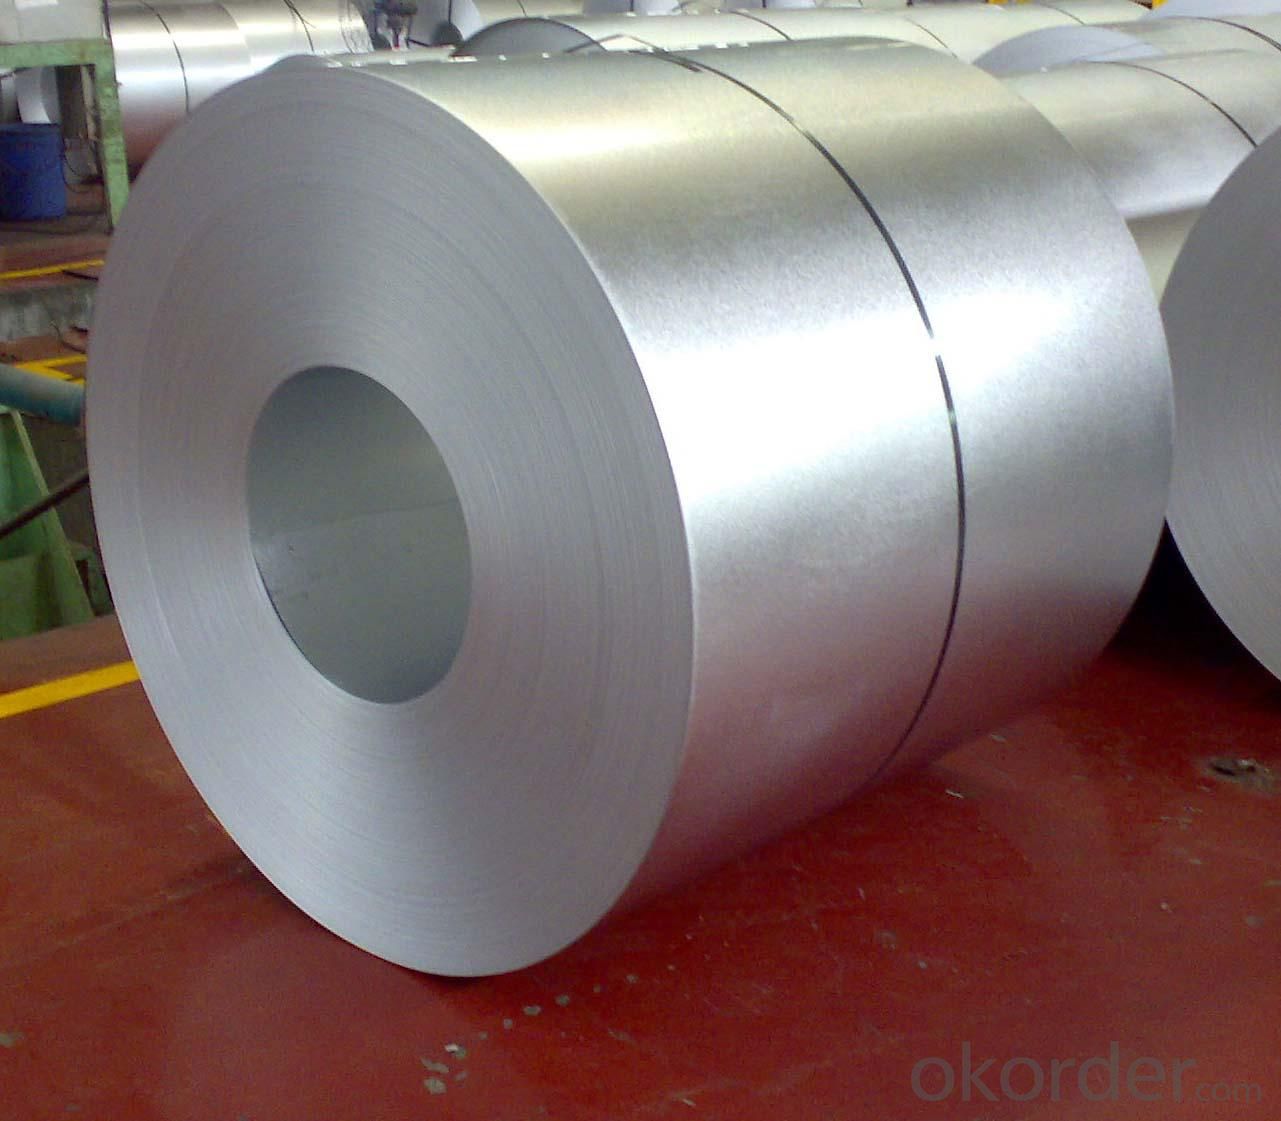 Galvalume Steel Sheet in Coil with Prime Quality and Best Price realtime quotes, lastsale